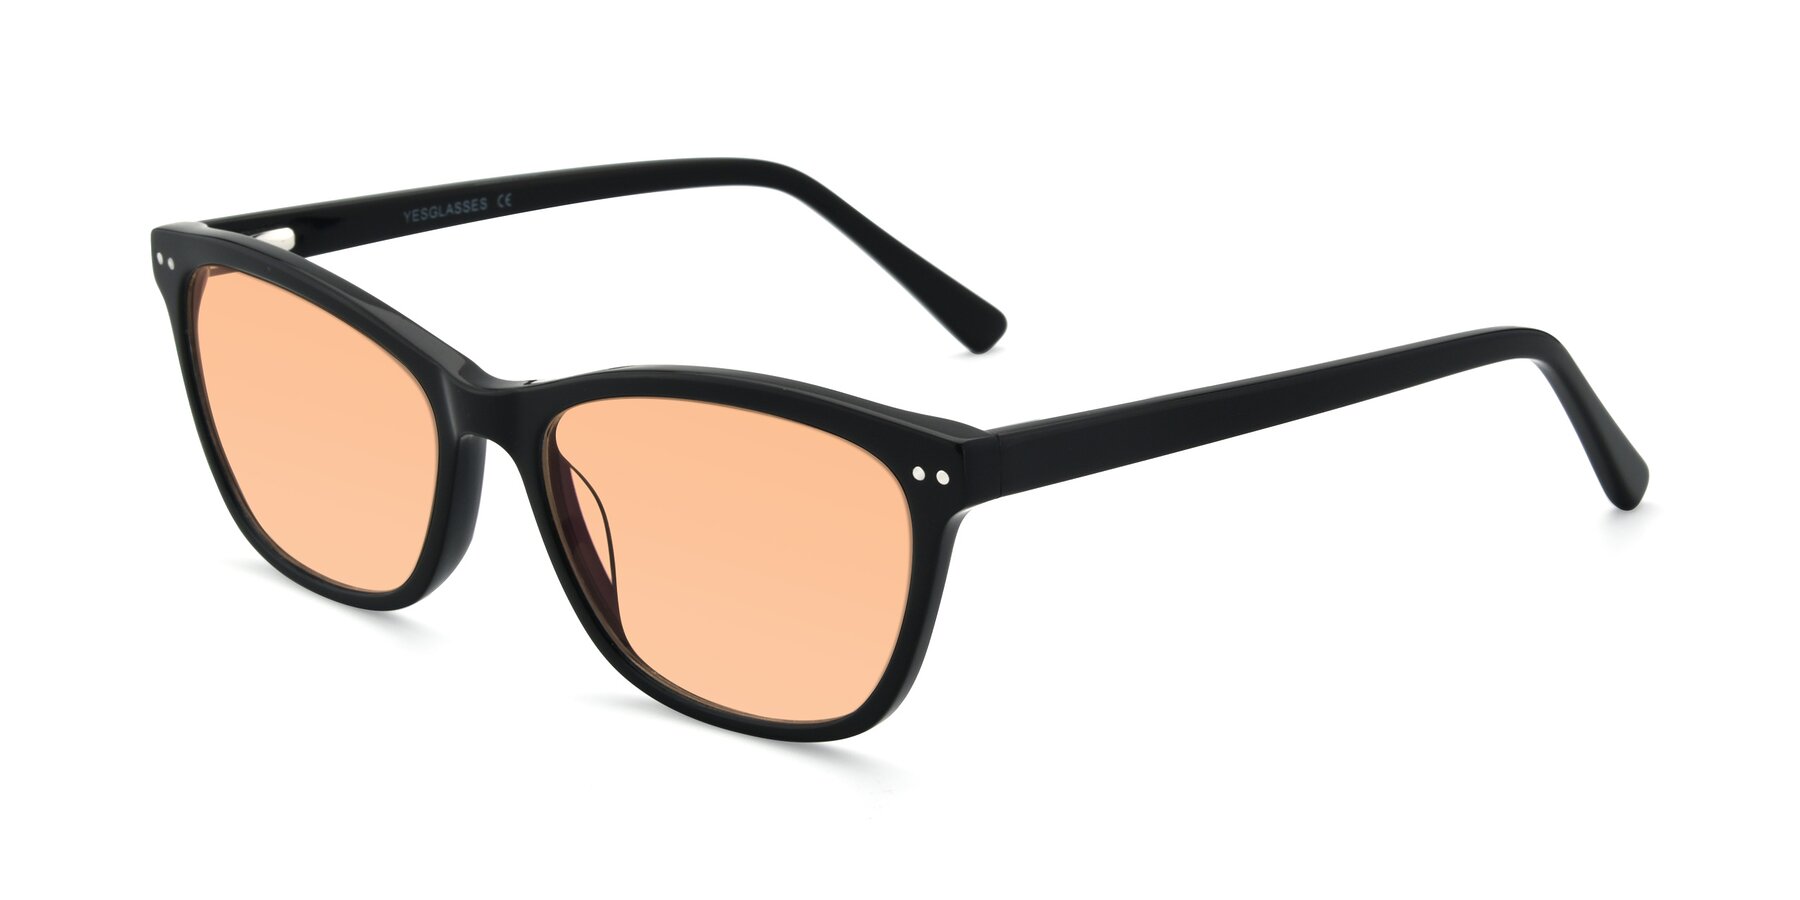 Angle of 17350 in Black with Light Orange Tinted Lenses